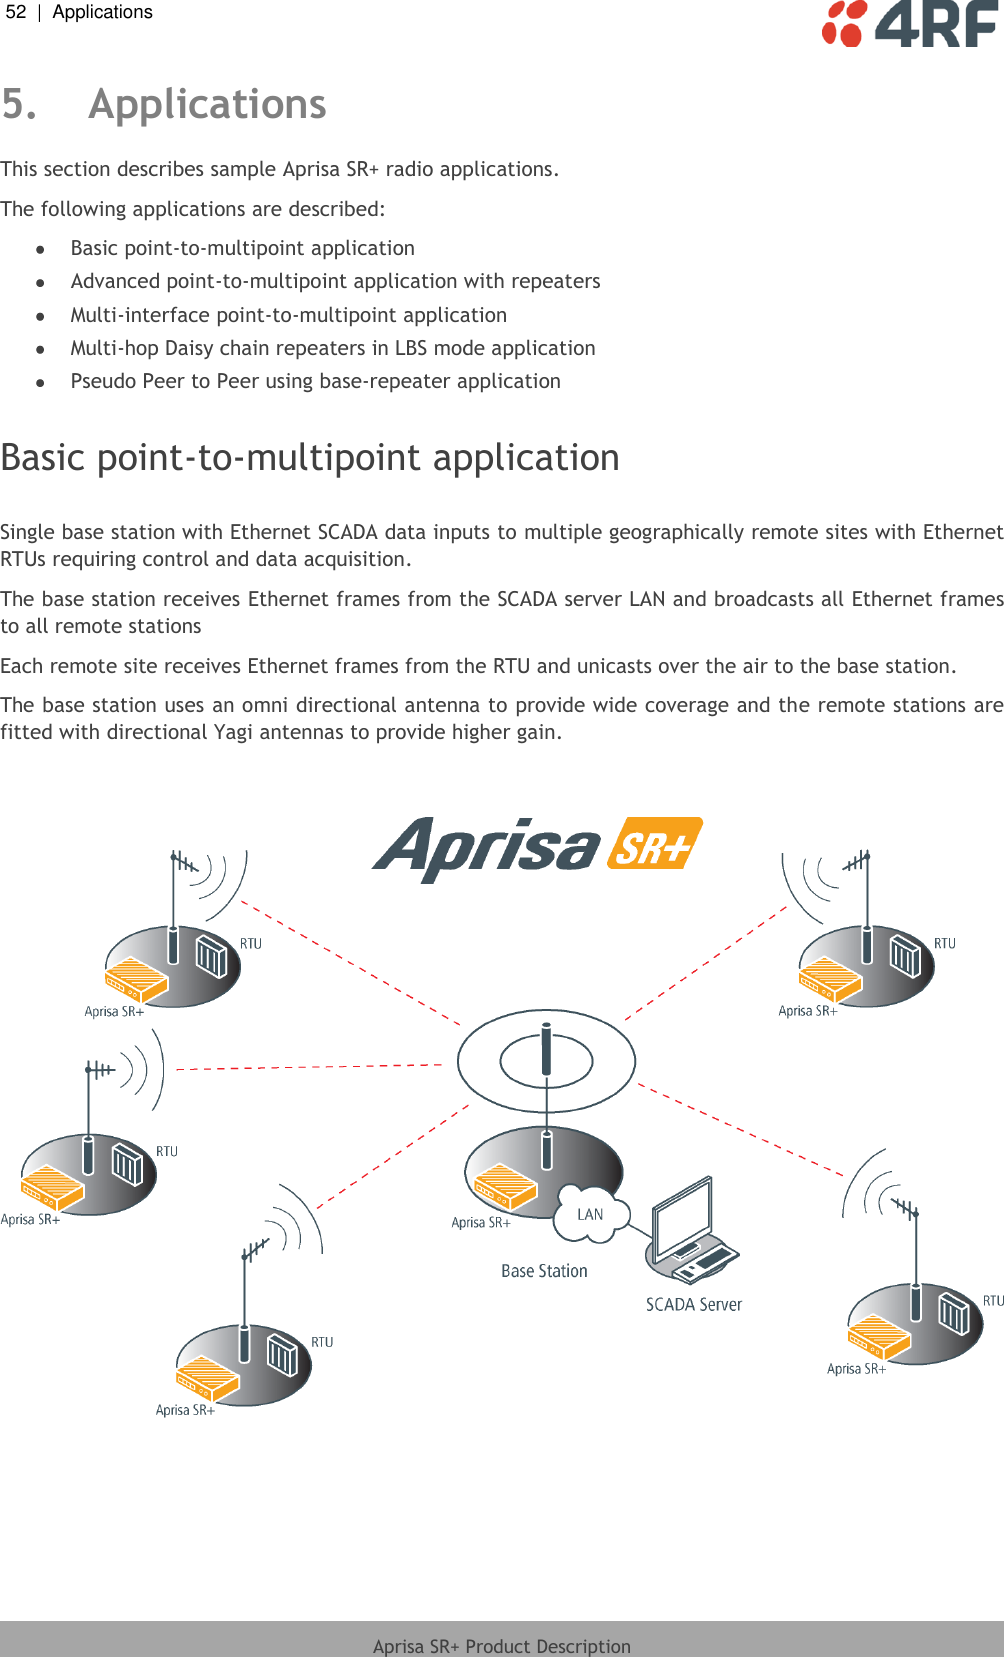 52  |  Applications   Aprisa SR+ Product Description  5. Applications This section describes sample Aprisa SR+ radio applications. The following applications are described:  Basic point-to-multipoint application  Advanced point-to-multipoint application with repeaters  Multi-interface point-to-multipoint application  Multi-hop Daisy chain repeaters in LBS mode application  Pseudo Peer to Peer using base-repeater application  Basic point-to-multipoint application  Single base station with Ethernet SCADA data inputs to multiple geographically remote sites with Ethernet RTUs requiring control and data acquisition. The base station receives Ethernet frames from the SCADA server LAN and broadcasts all Ethernet frames to all remote stations  Each remote site receives Ethernet frames from the RTU and unicasts over the air to the base station. The base station uses an omni directional antenna to provide wide coverage and the remote stations are fitted with directional Yagi antennas to provide higher gain.     